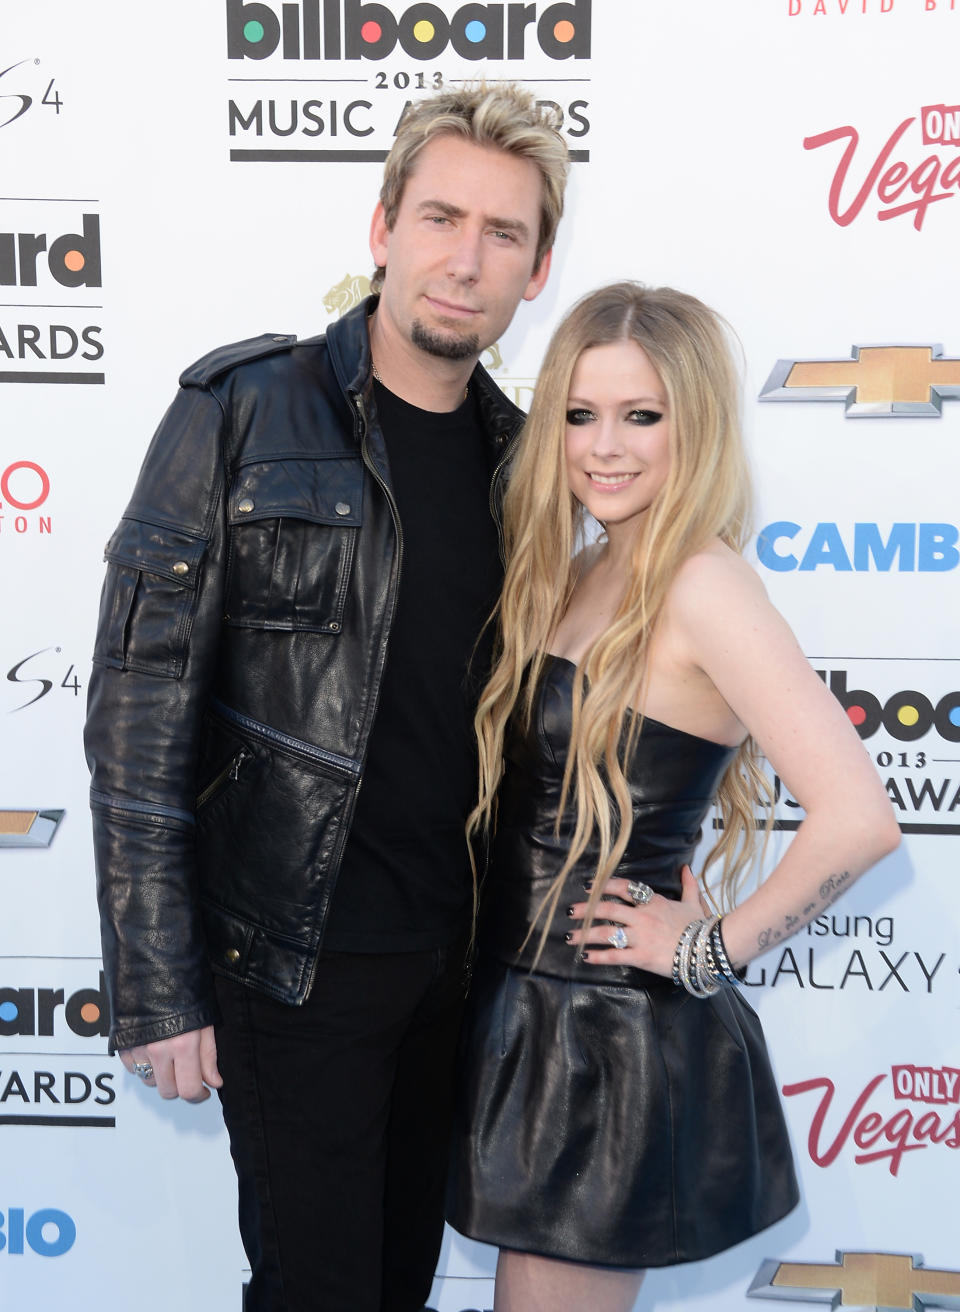 Chad Kroeger and Avril Lavigne arrive at the 2013 Billboard Music Awards on May 19, 2013. (Photo: Jason Merritt/Getty Images)